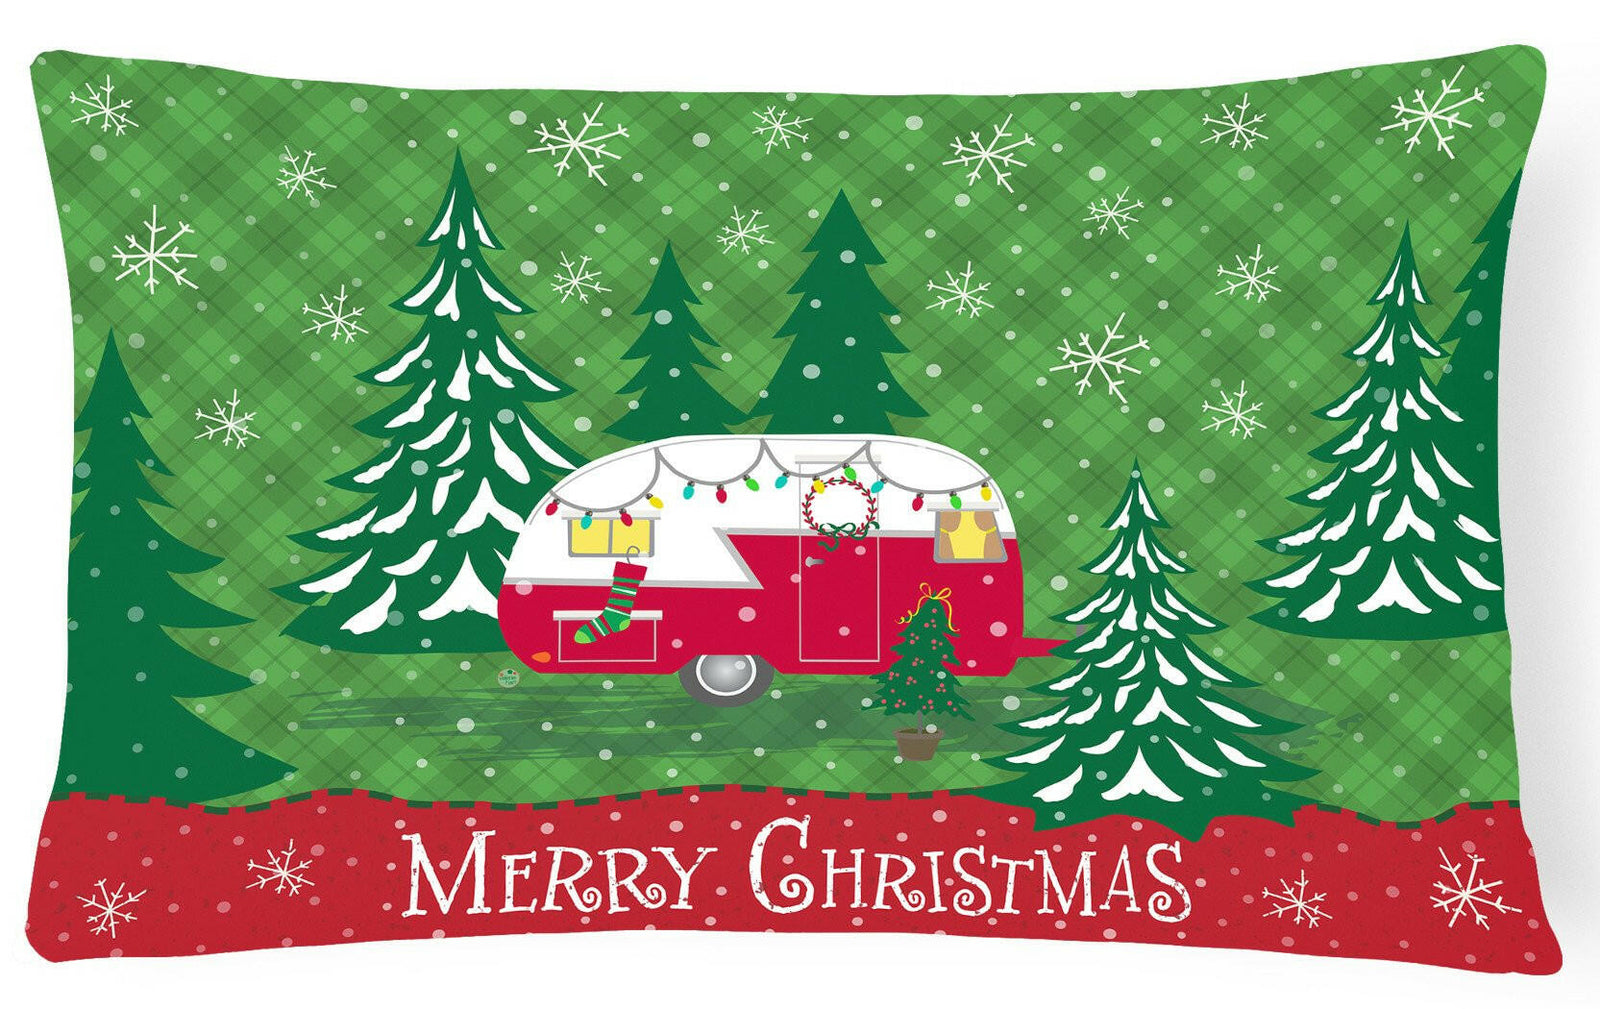 Christmas Vintage Glamping Trailer Fabric Decorative Pillow VHA3018PW1216 by Caroline's Treasures